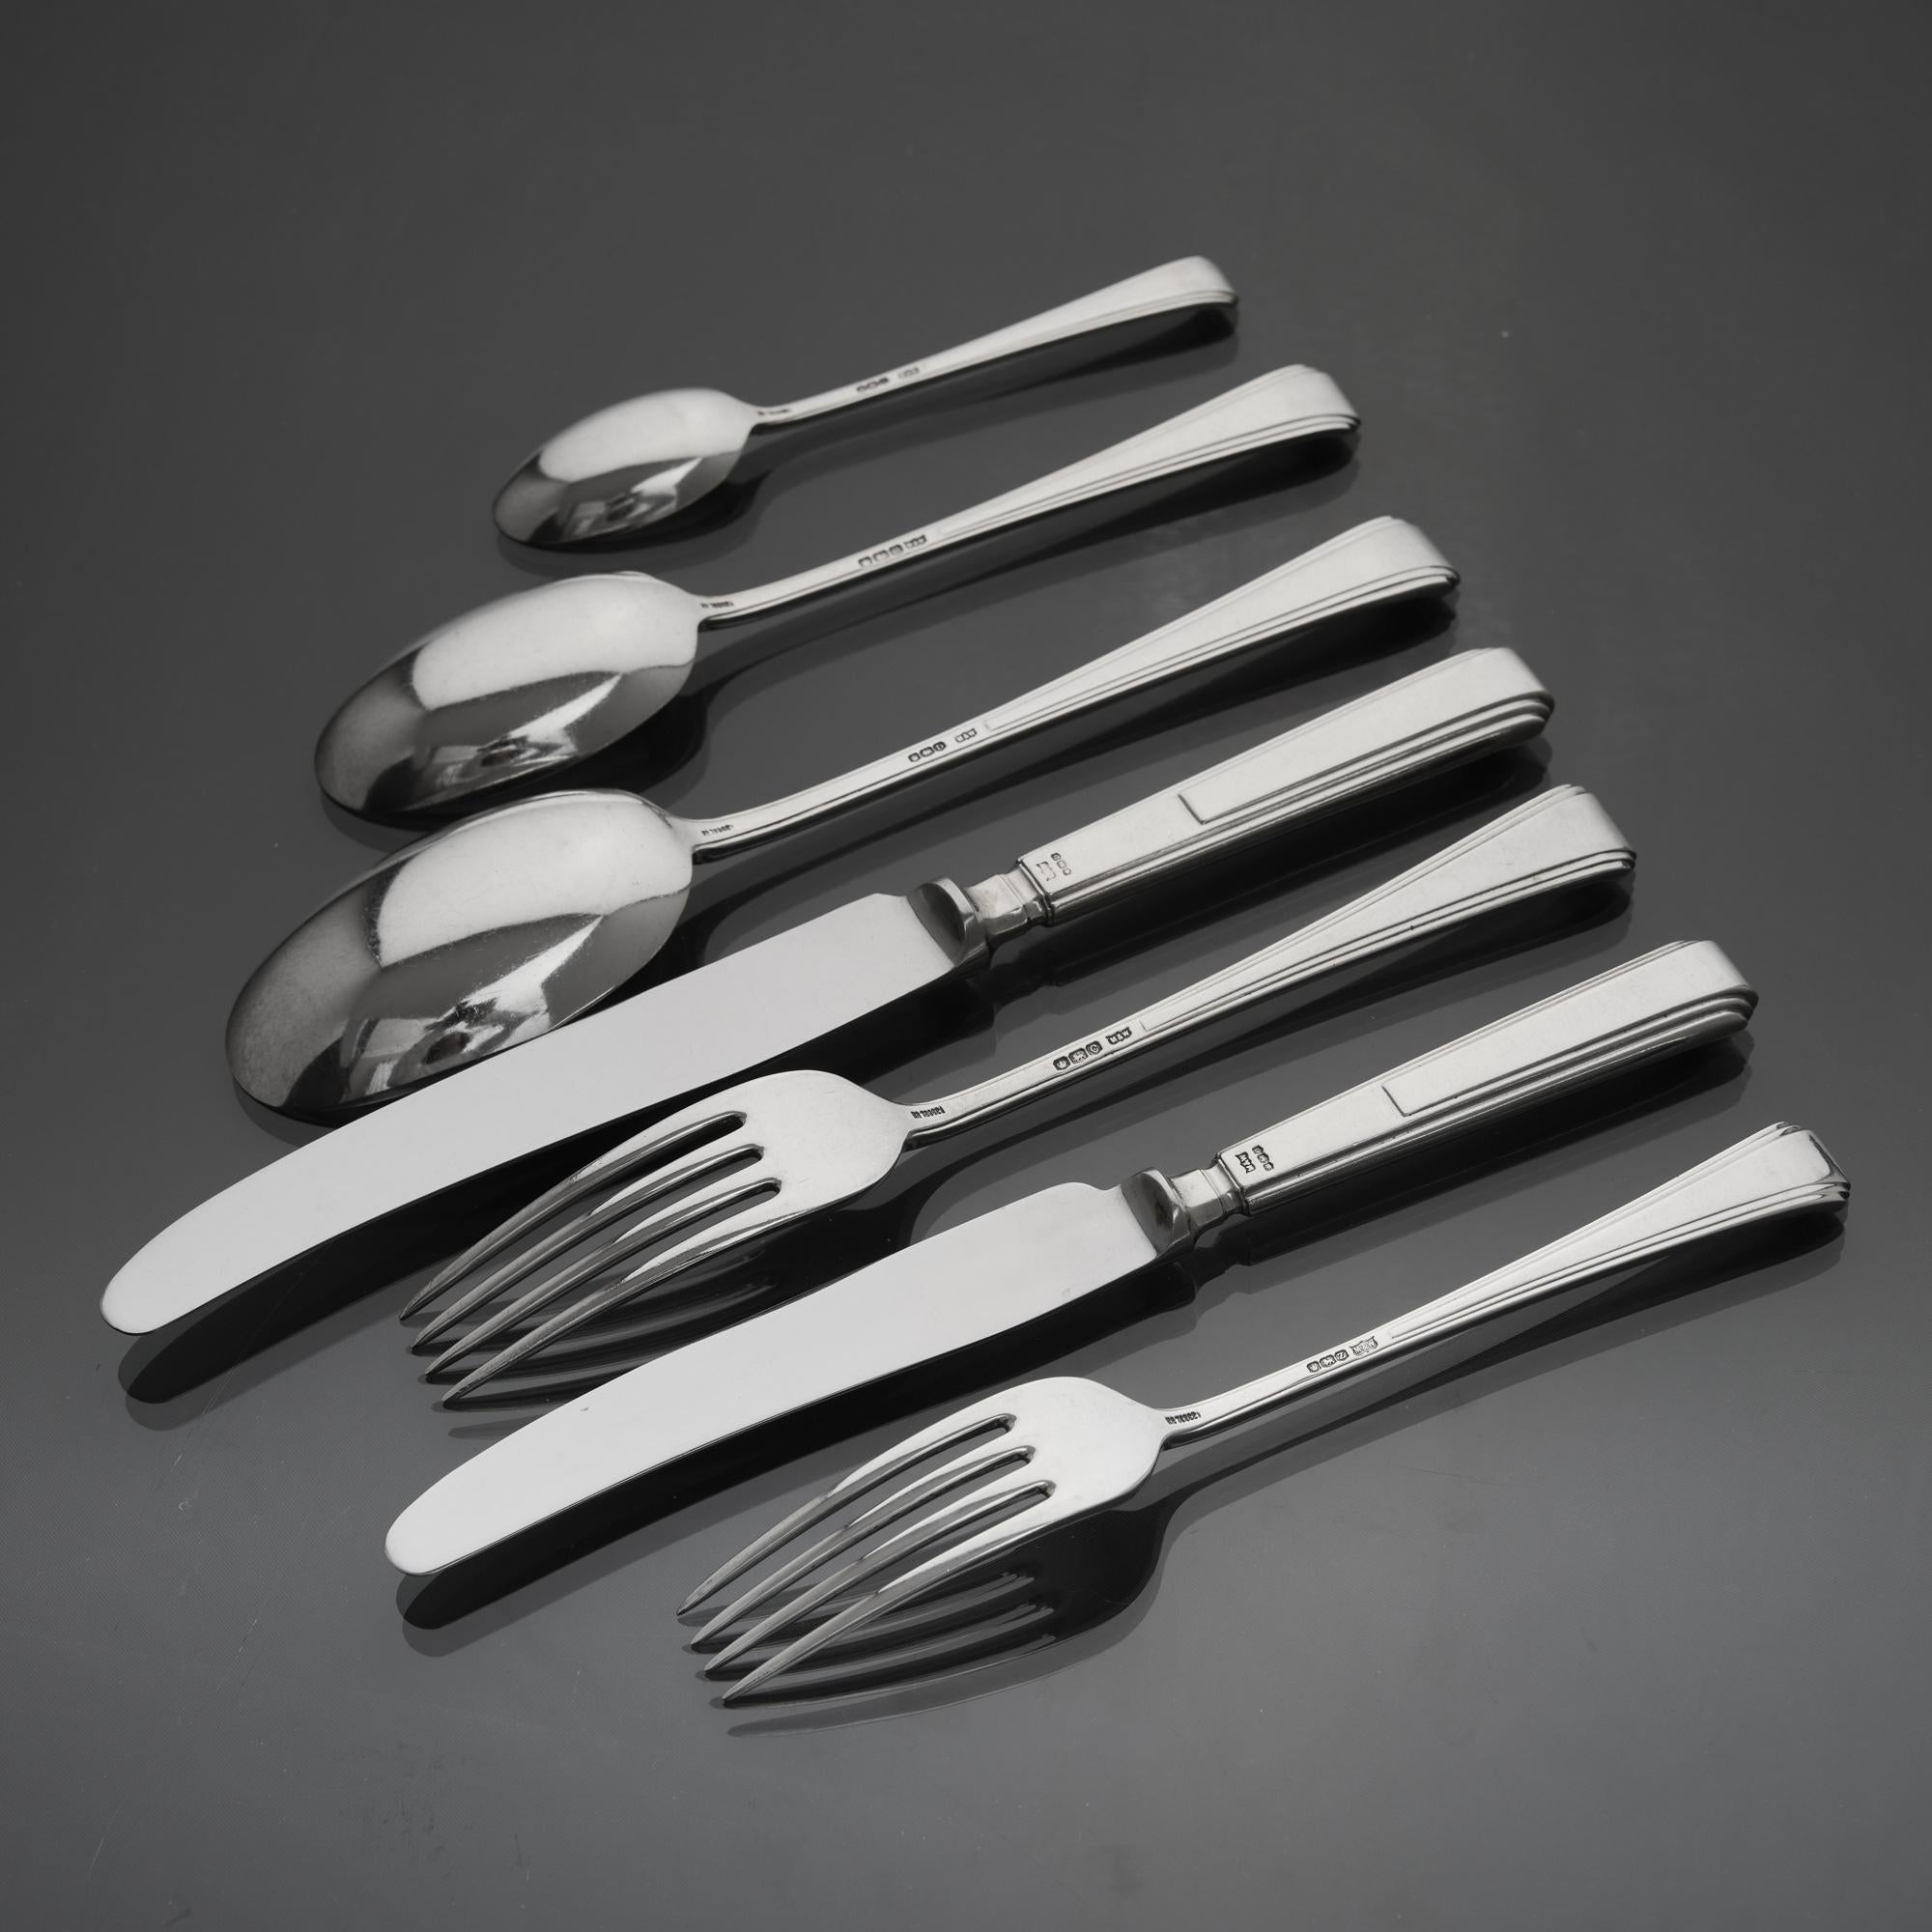 Extensive set of George VI silver flatware in the Tudor pattern, featuring stepped Art Deco style terminals; a characteristic design motif of the Art Deco era.
 
 With all pieces made by Mappin and Webb and presented in the original fitted oak